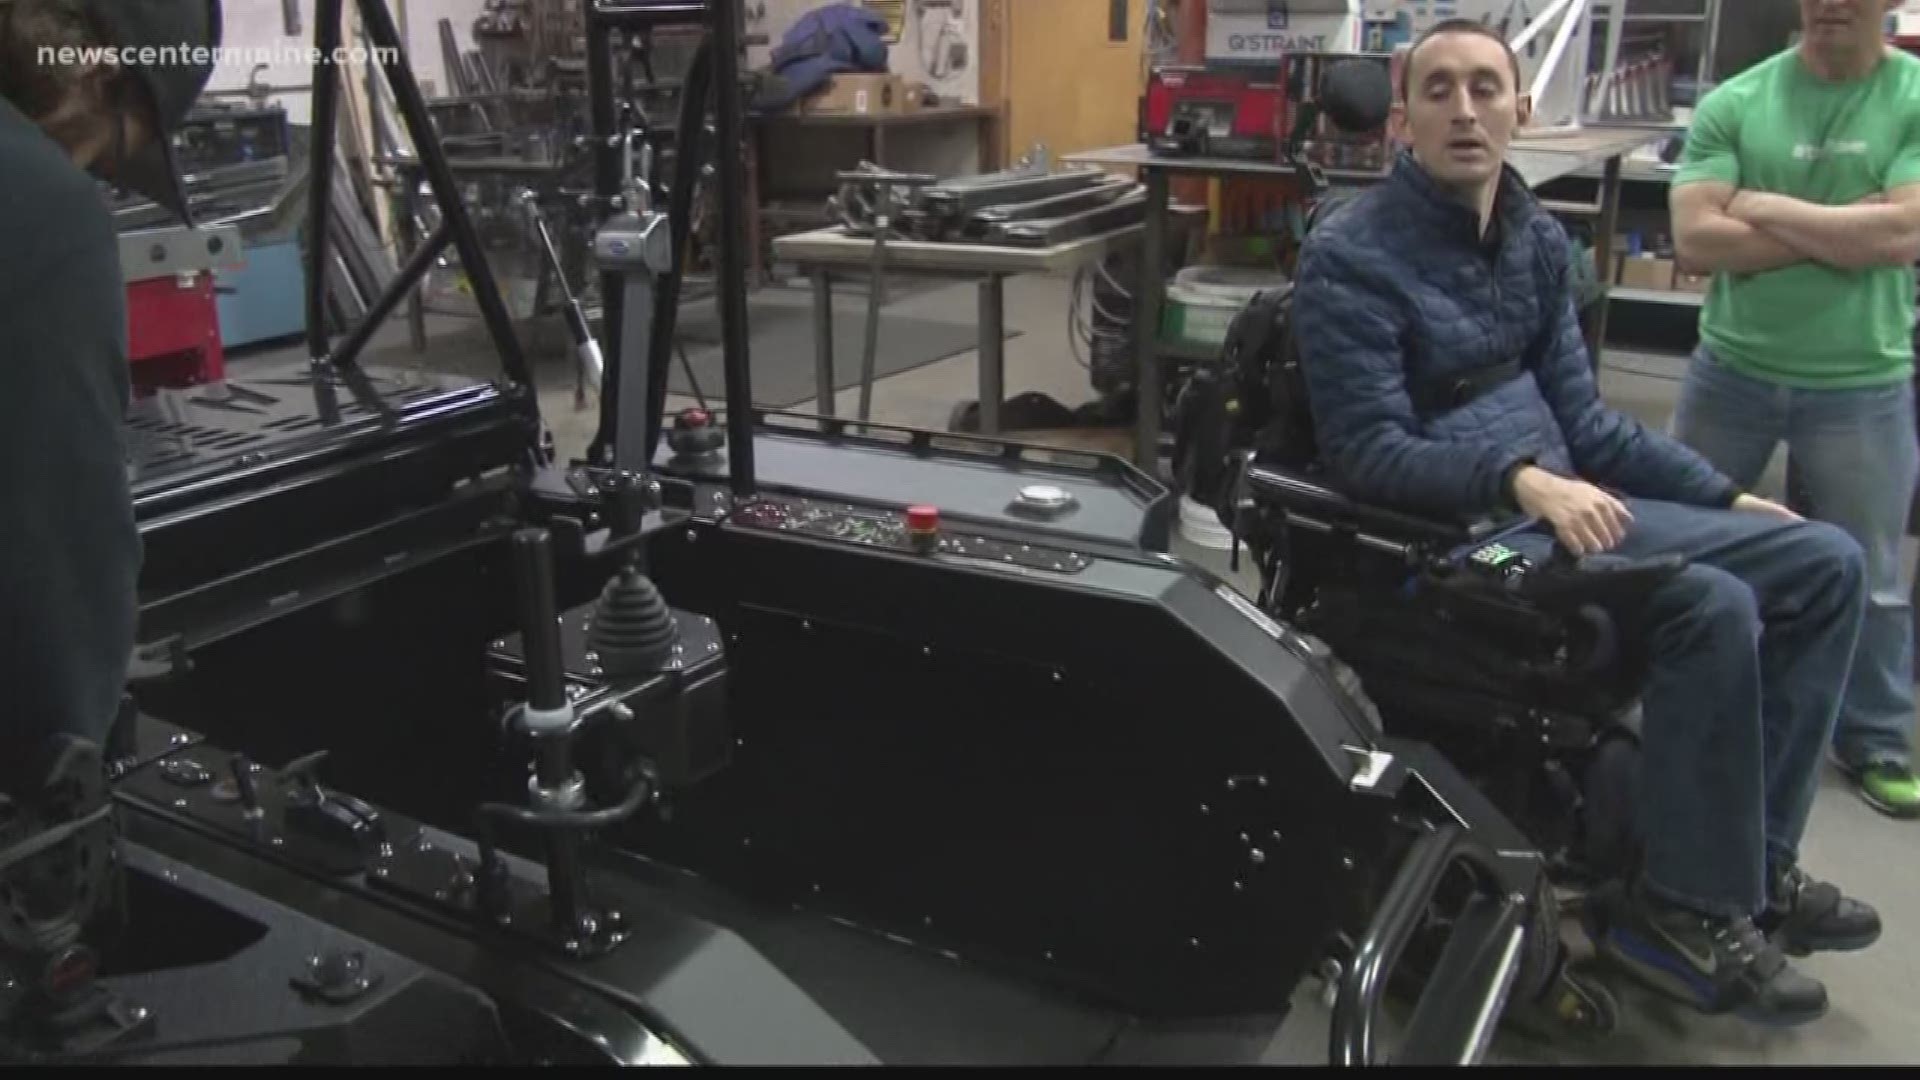 Mike Chasse became paralyzed after a skiing accident 11 years ago. With the help of his community, he's now able to enjoy the outdoors again with his new Ripchair.